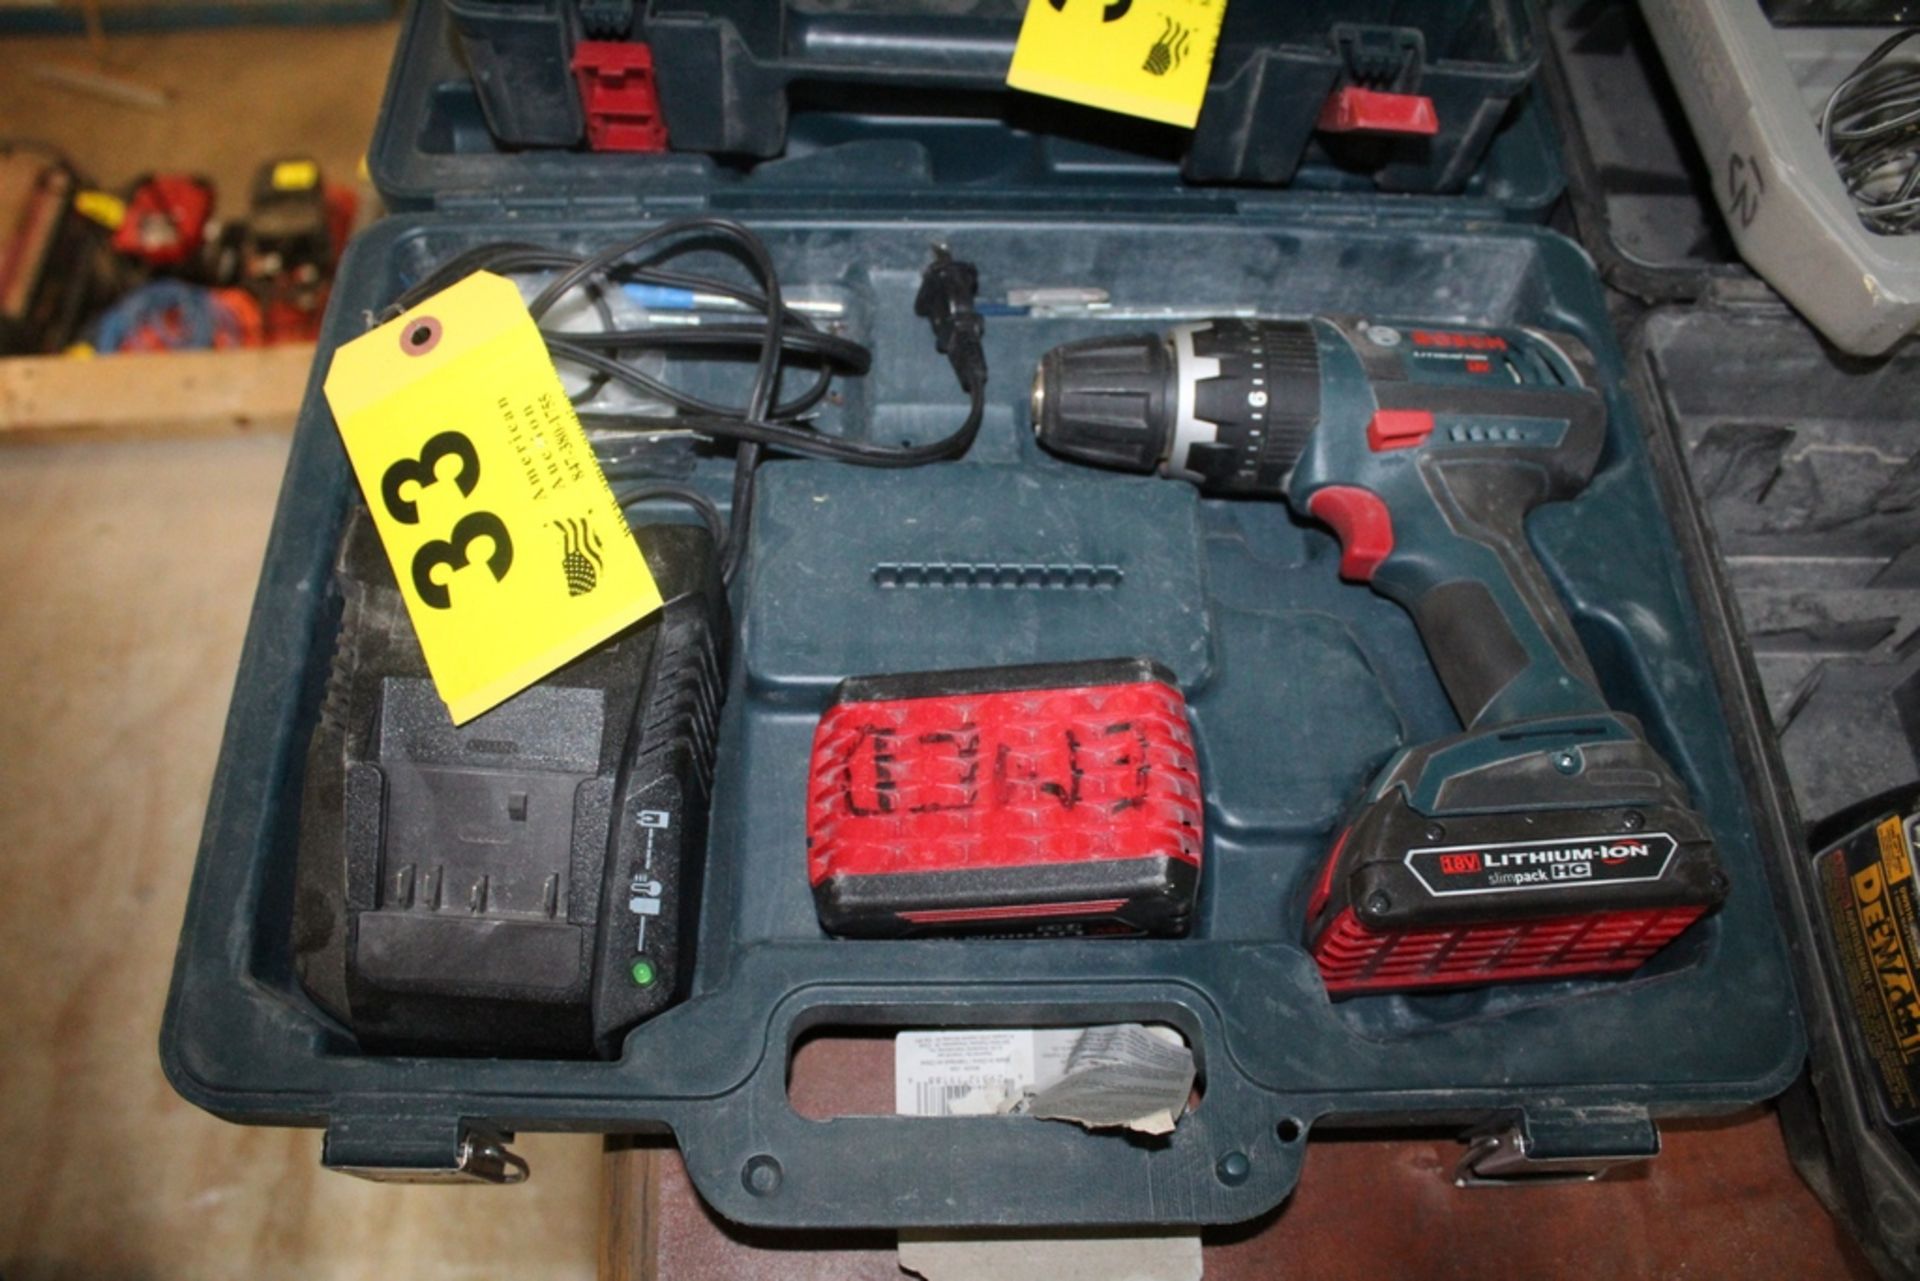 BOSCH MODEL 18V CORDLESS DRILL WITH BATTERY, CHARGER AND CASE